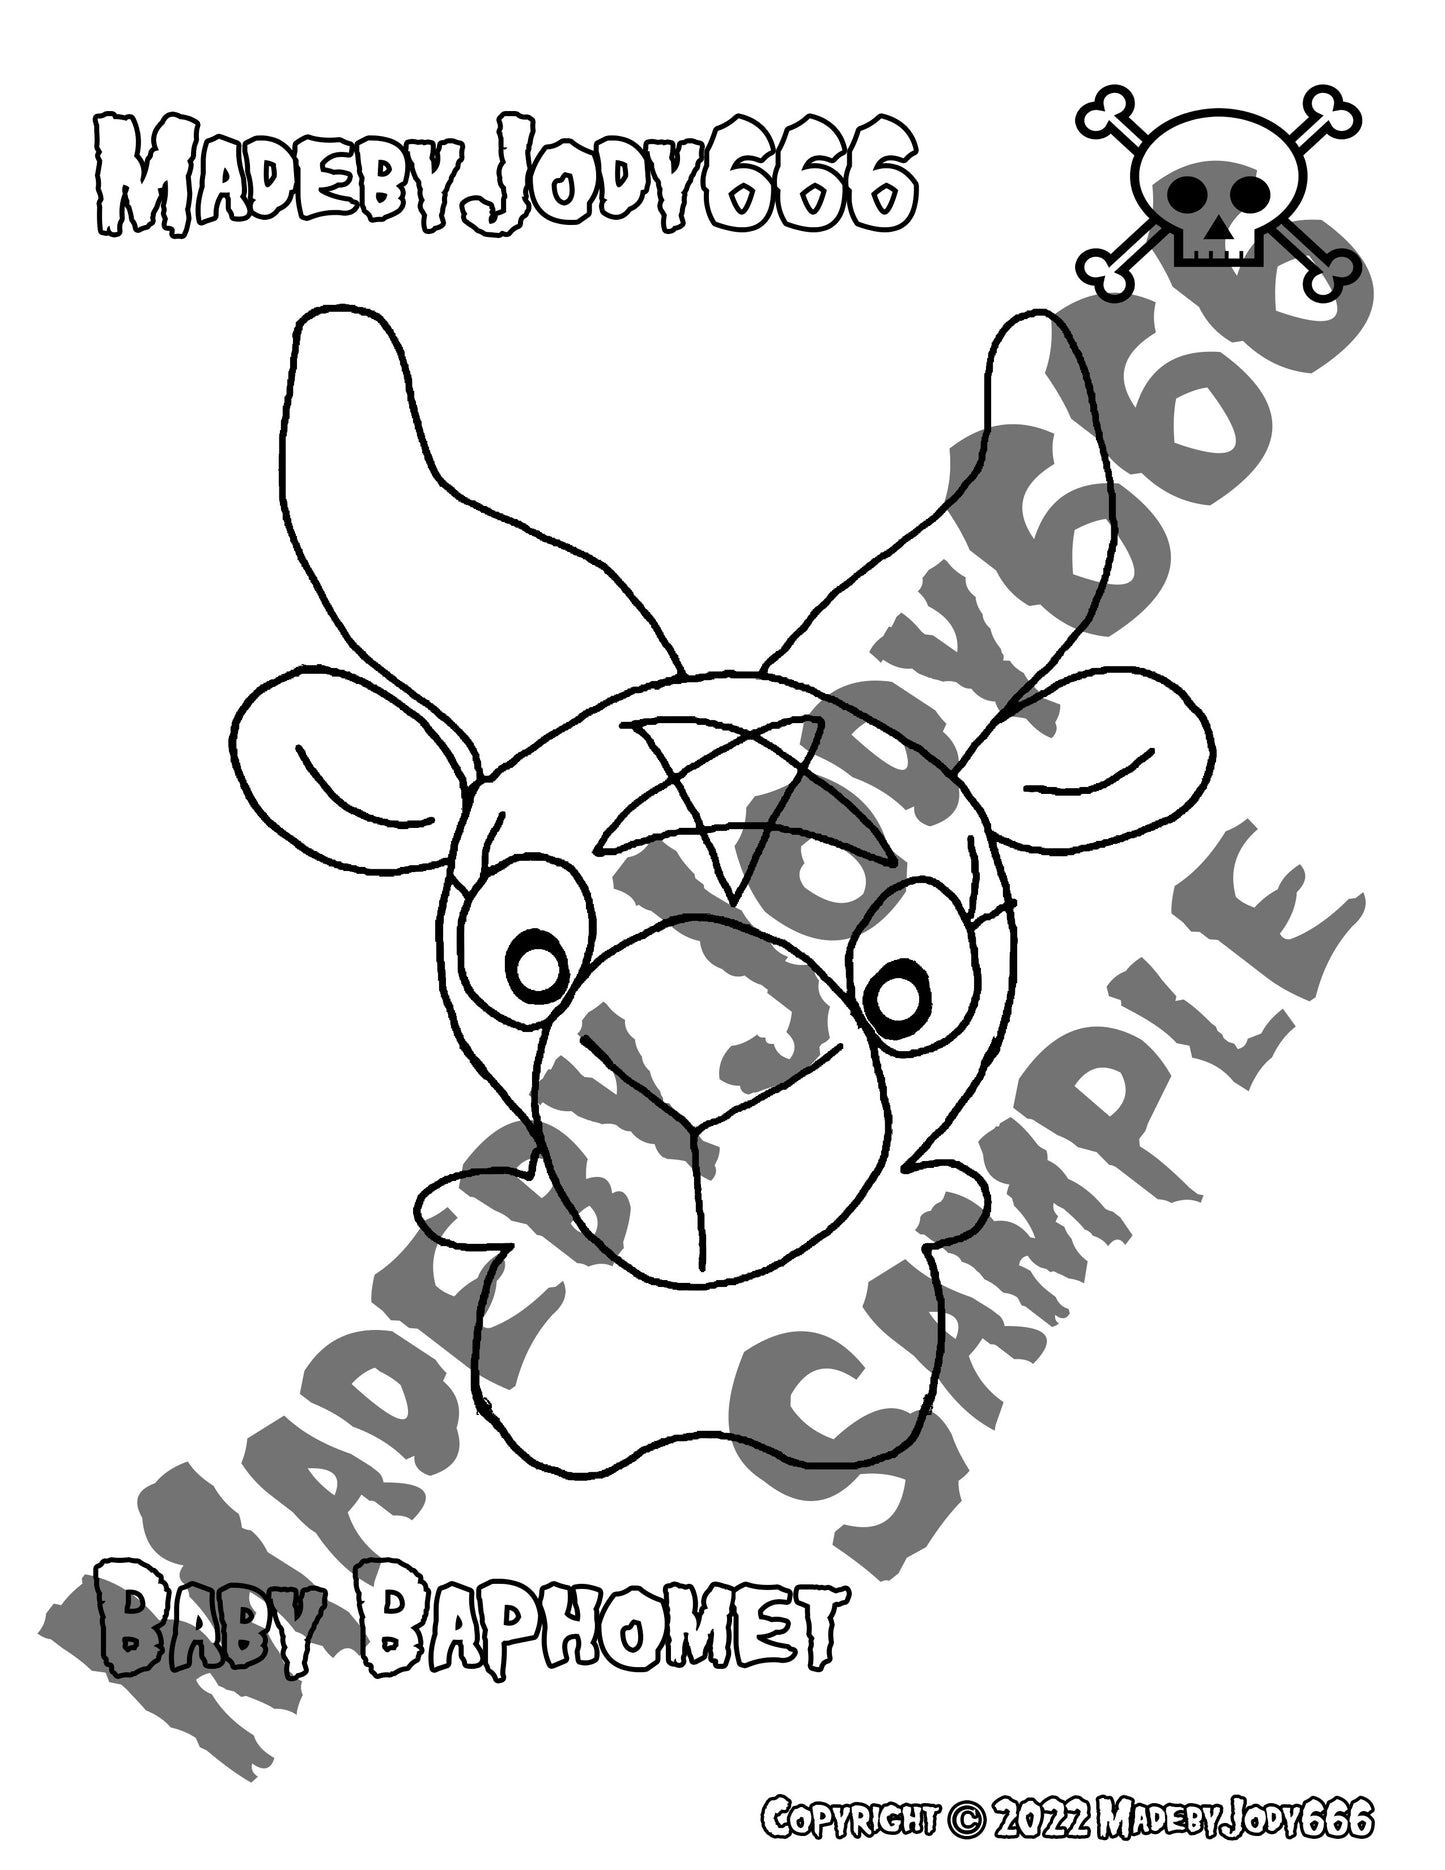 Baby Baphomet Crochet Pattern + Coloring Page